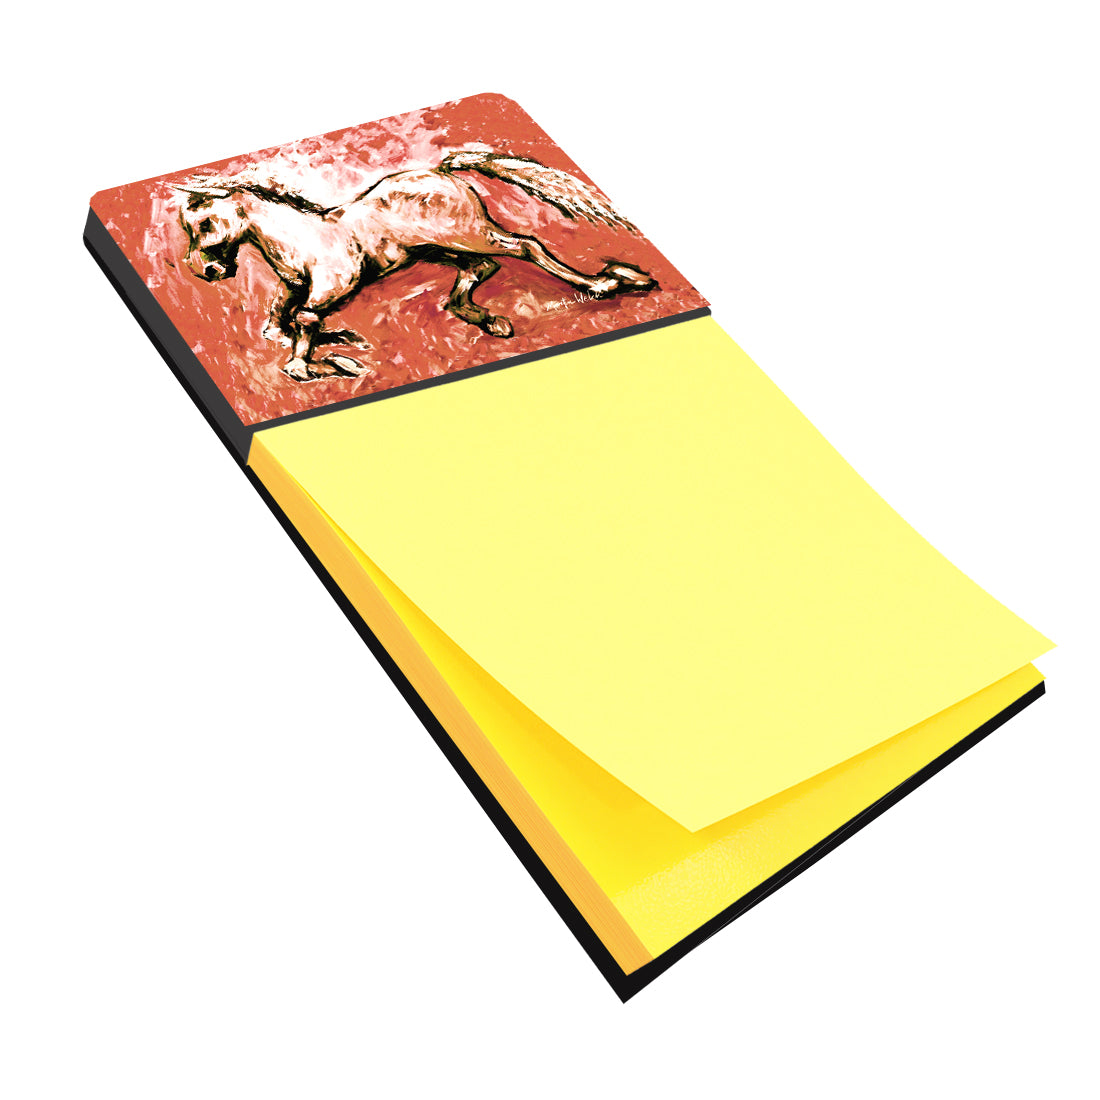 Buy this Shadow the Horse in Red Sticky Note Holder